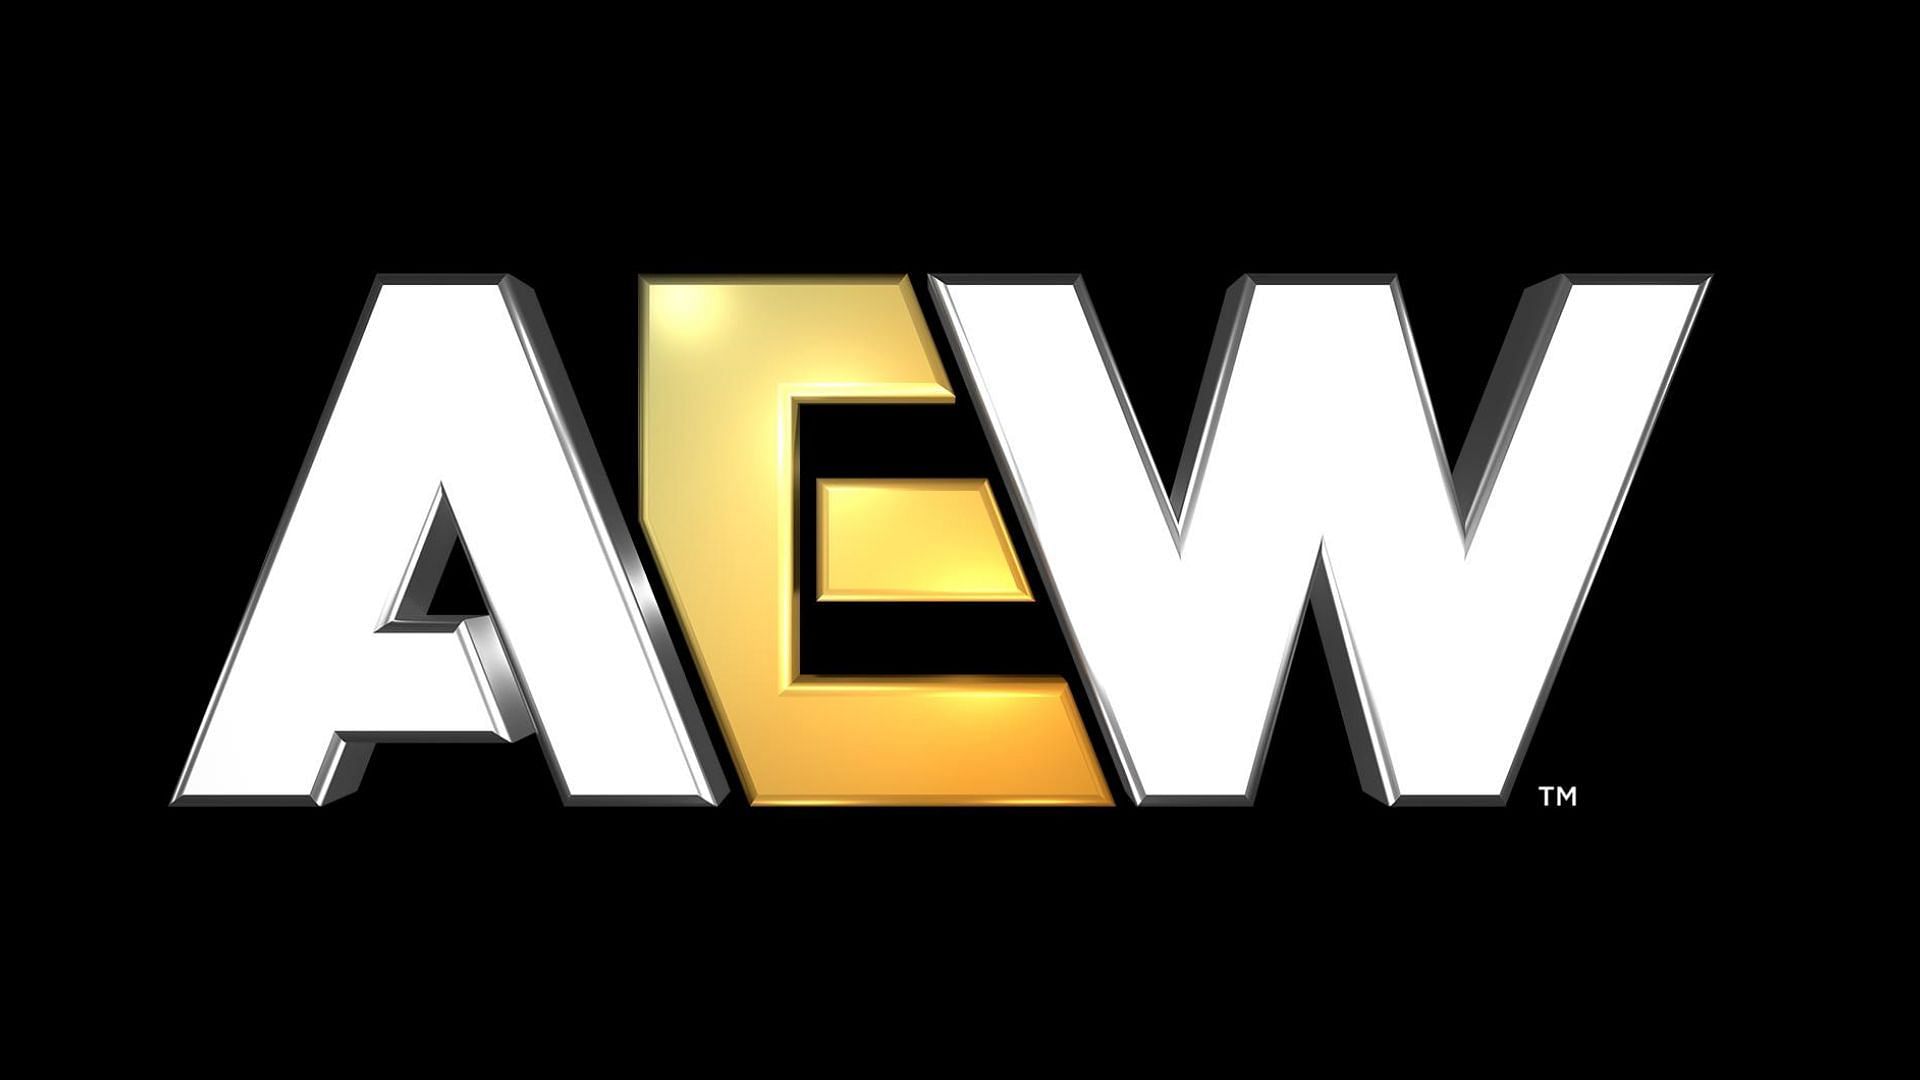 AEW was founded in 2019